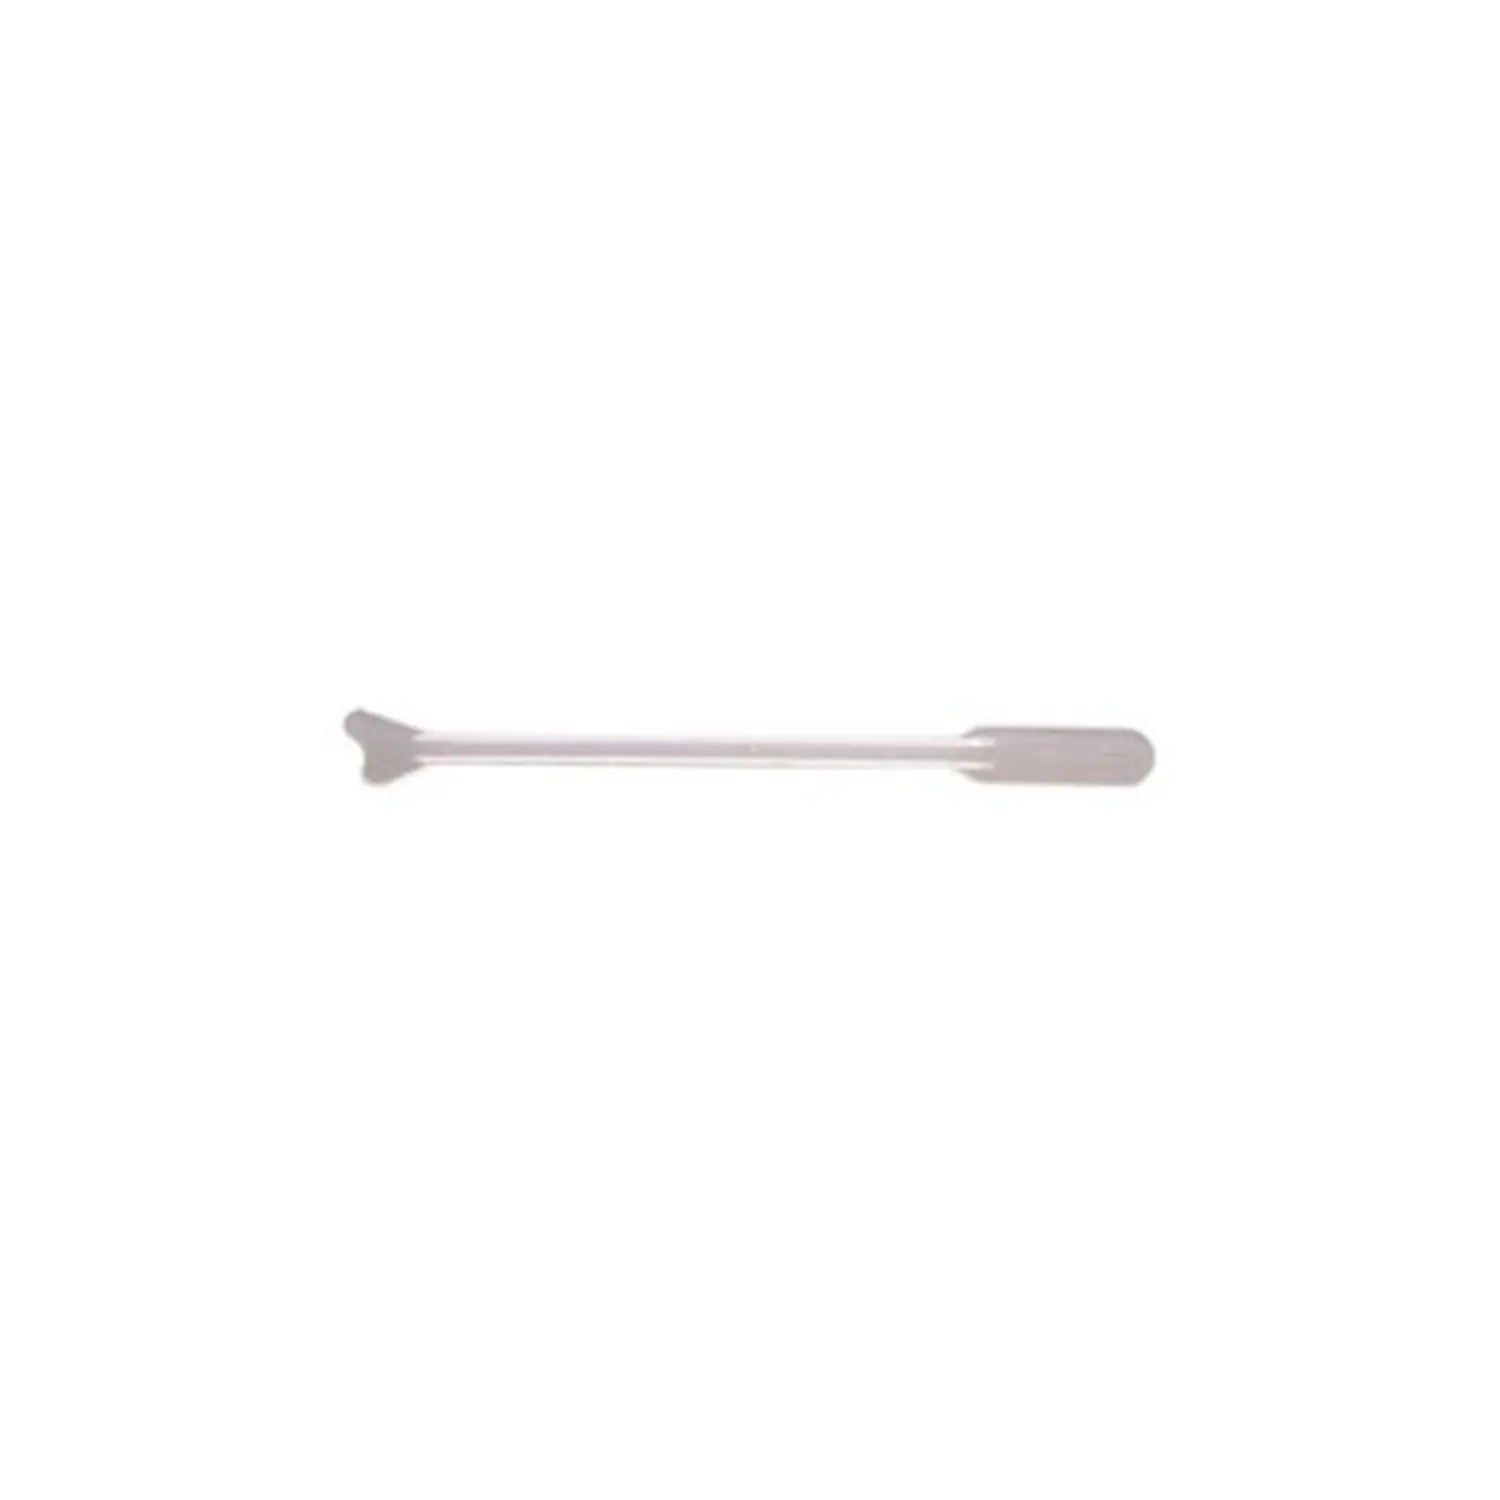 https://www.pelegrinamedical.com/Shared/Images/Product/CooperSurgical-Medscand-Pap-Perfect-Spatula-Different-Versions/Untitled-1.webp